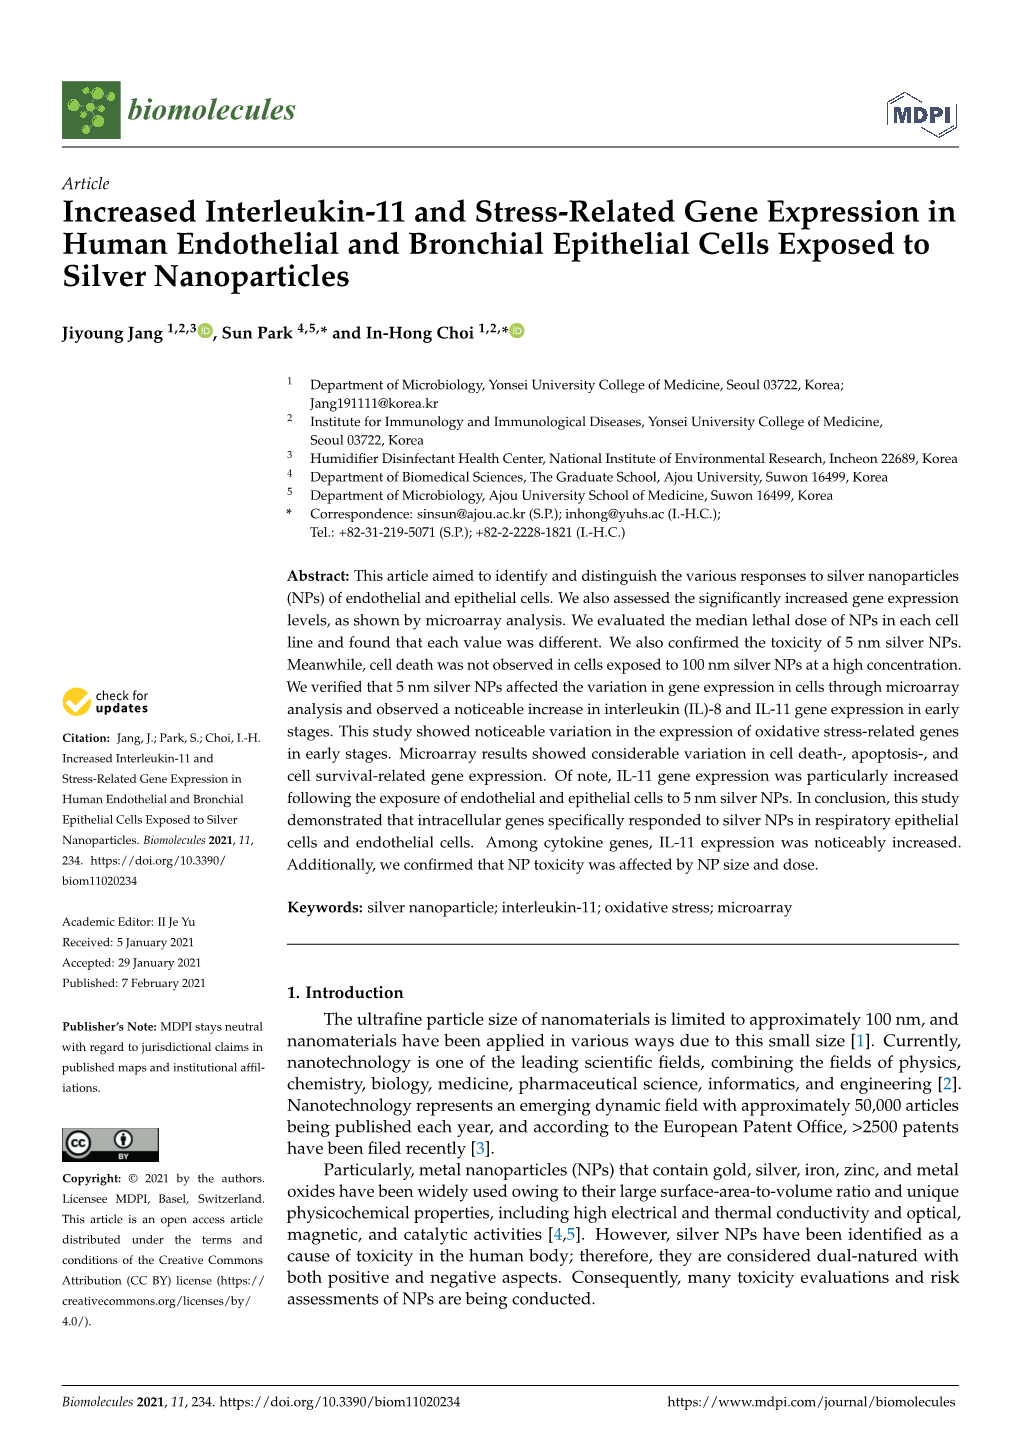 Increased Interleukin-11 and Stress-Related Gene Expression in Human Endothelial and Bronchial Epithelial Cells Exposed to Silver Nanoparticles